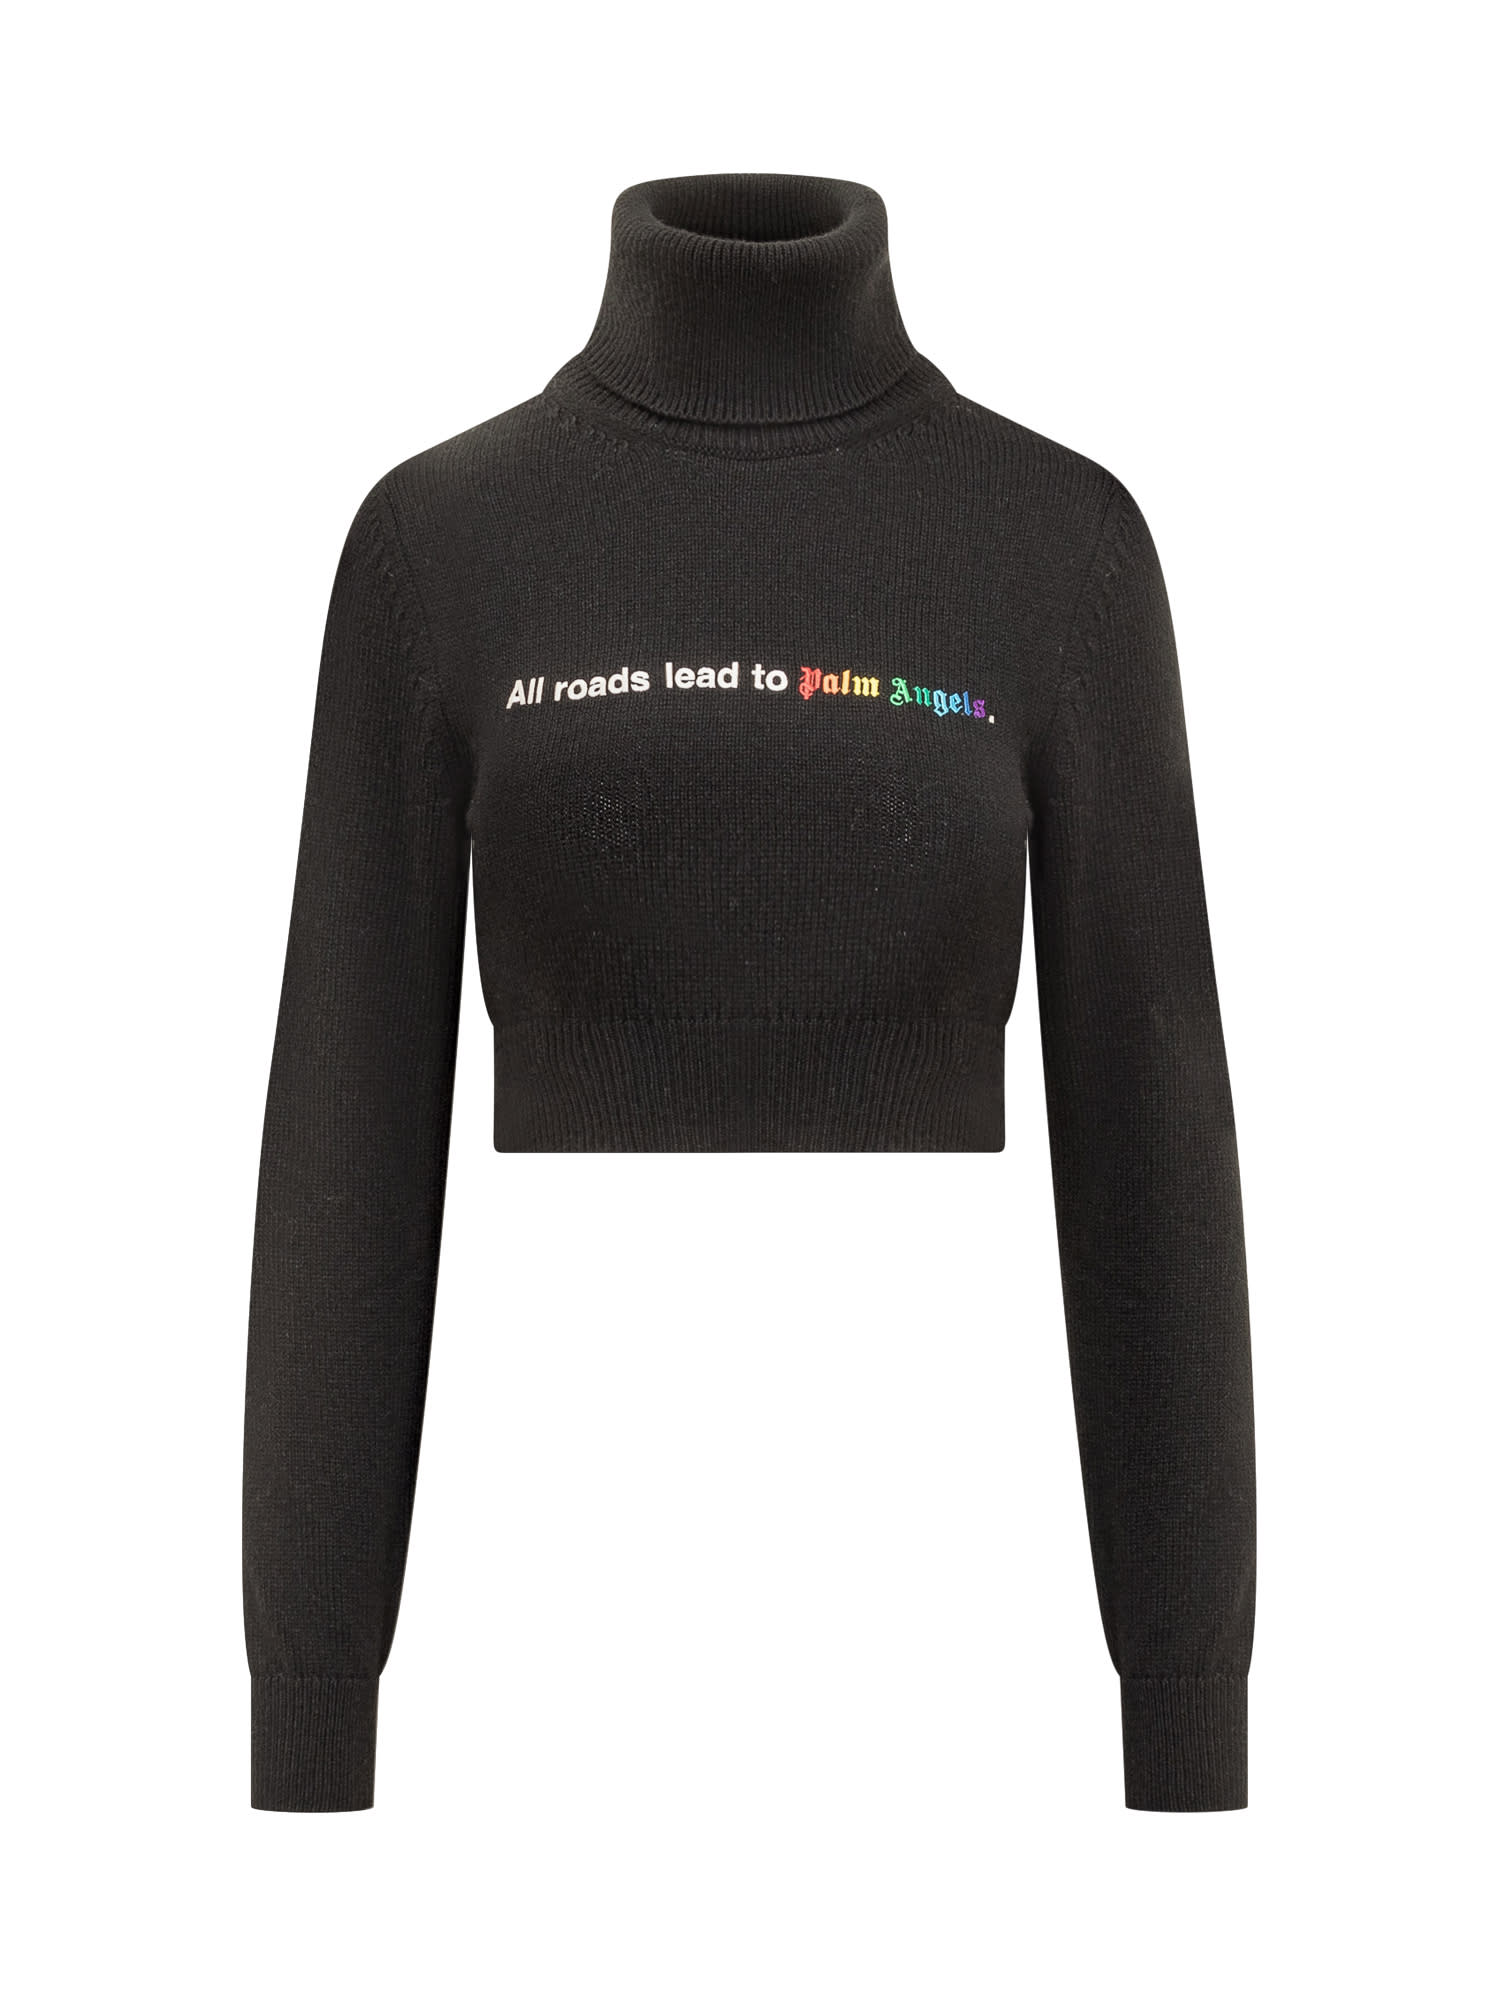 Palm Angels Turtleneck Sweater In Black/white